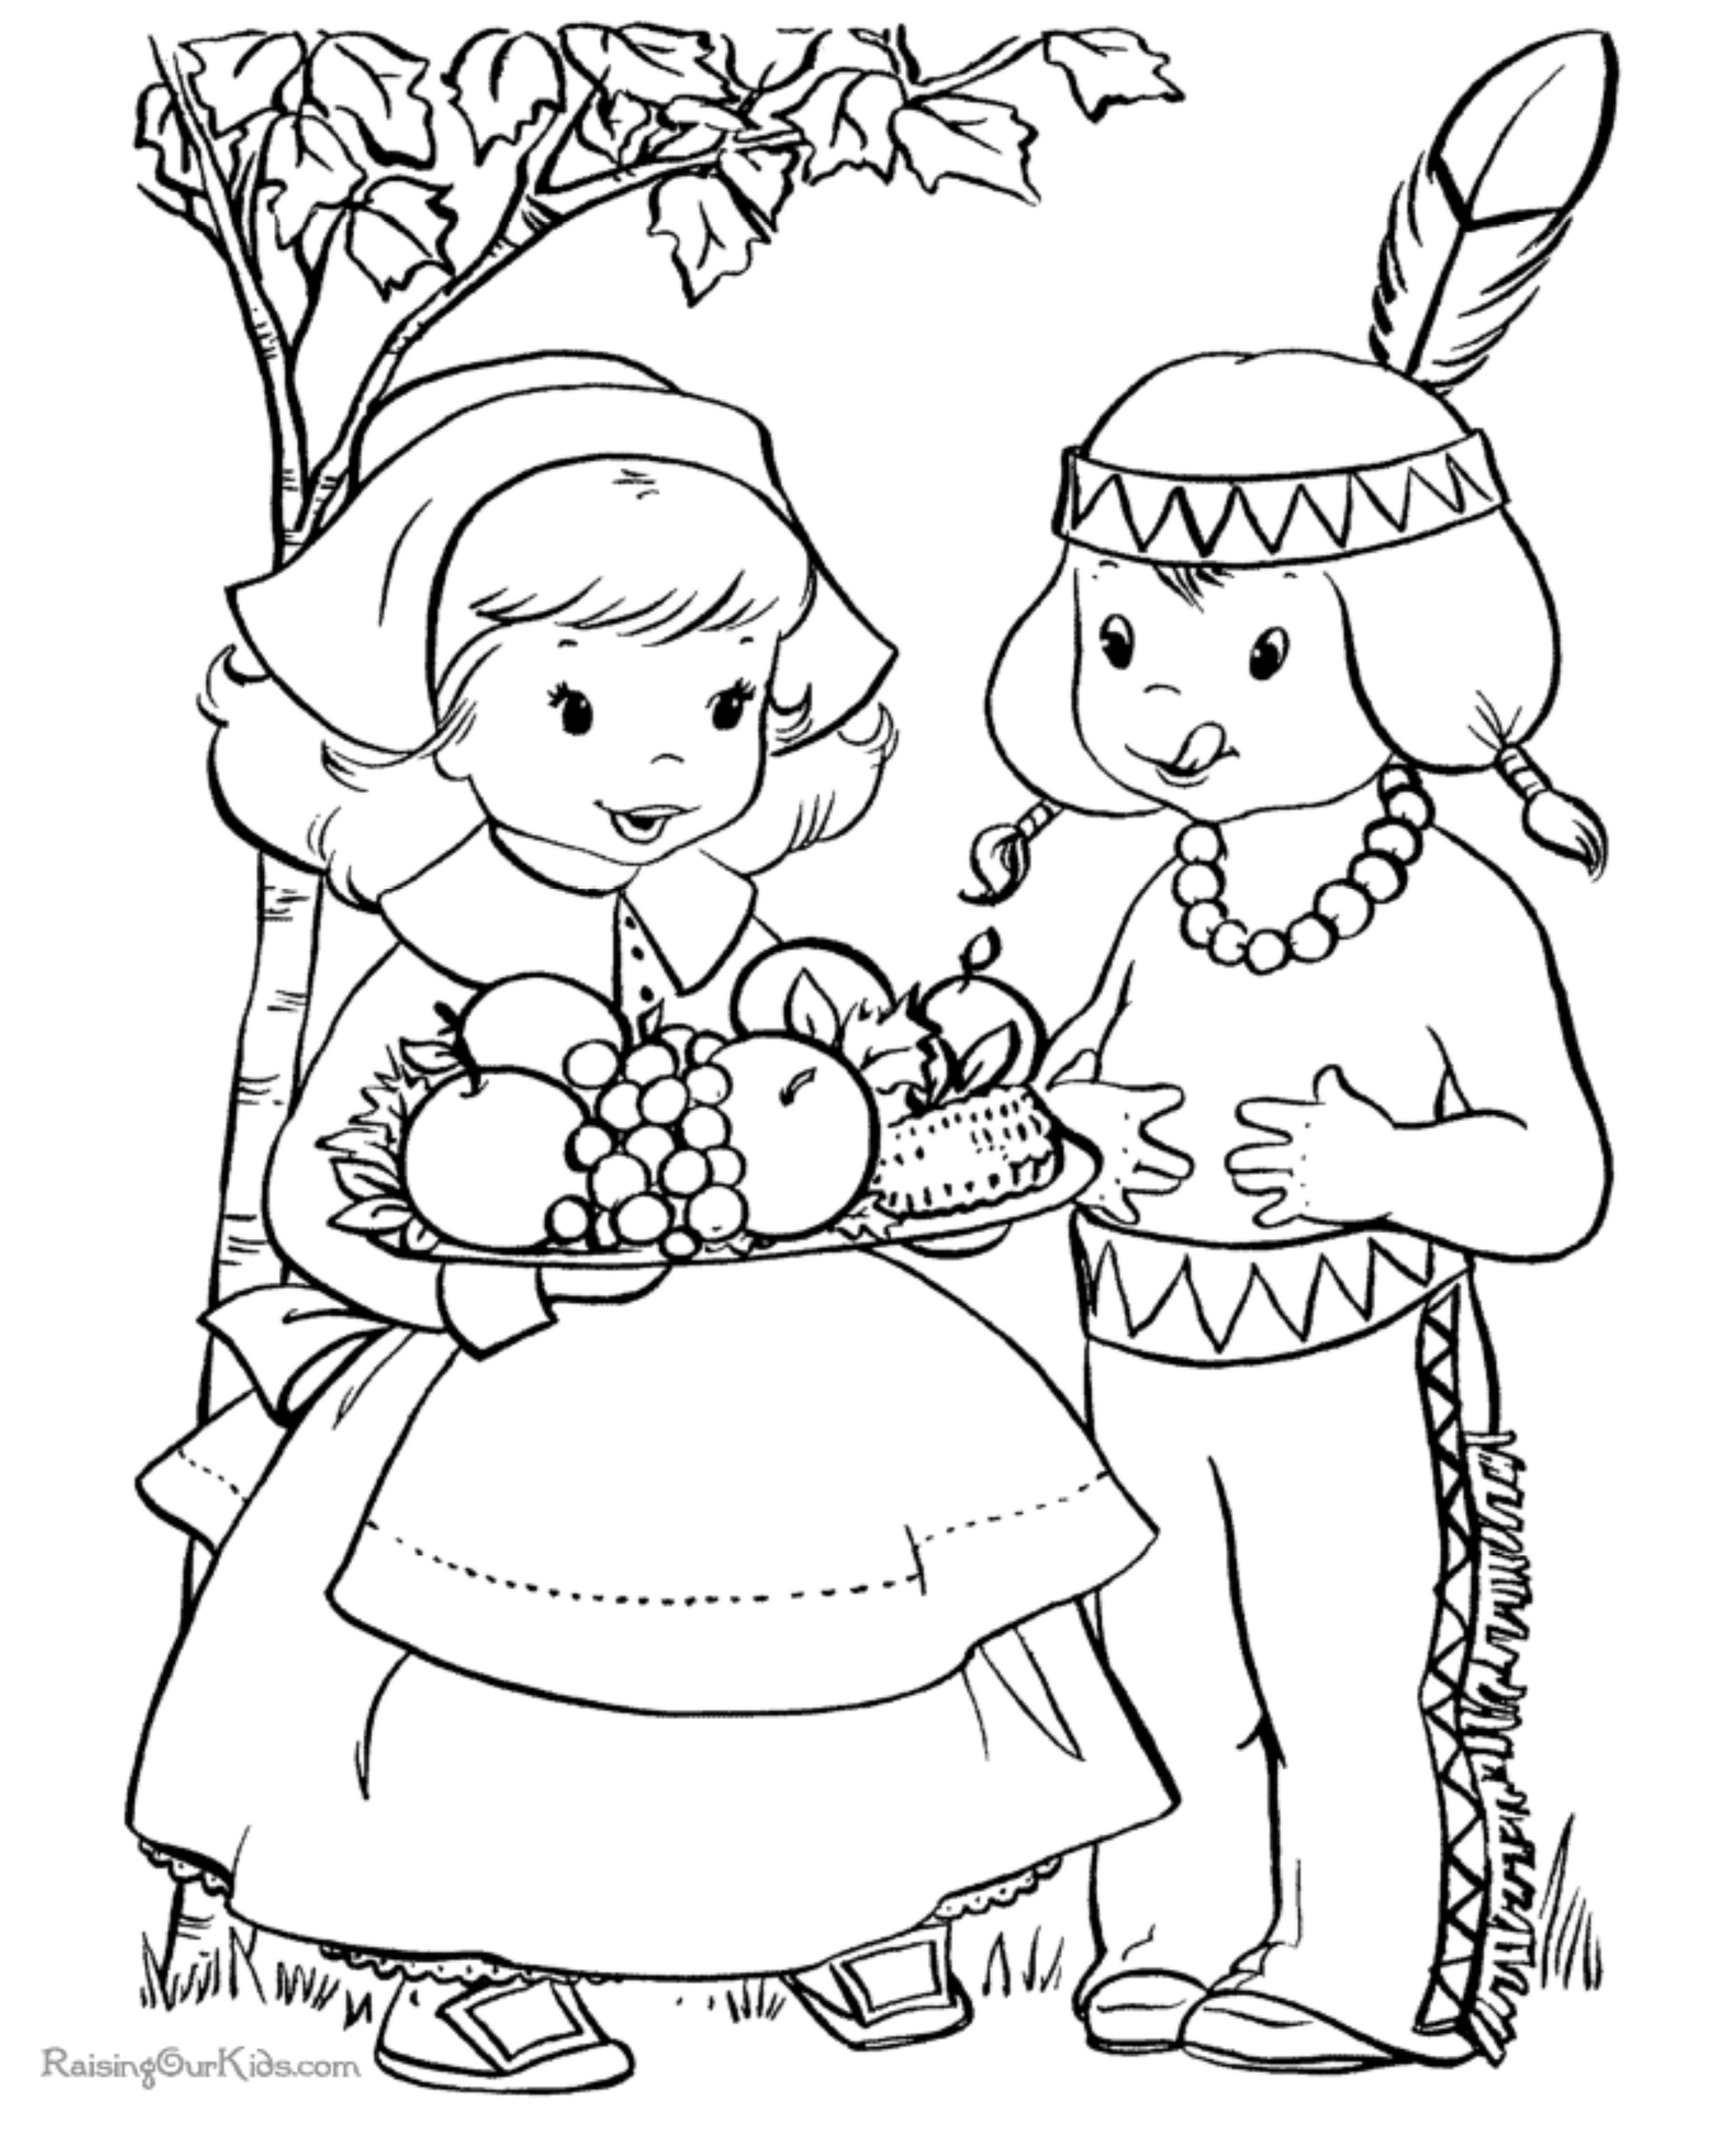 Thanksgiving Turkey Coloring Page
 Thanksgiving